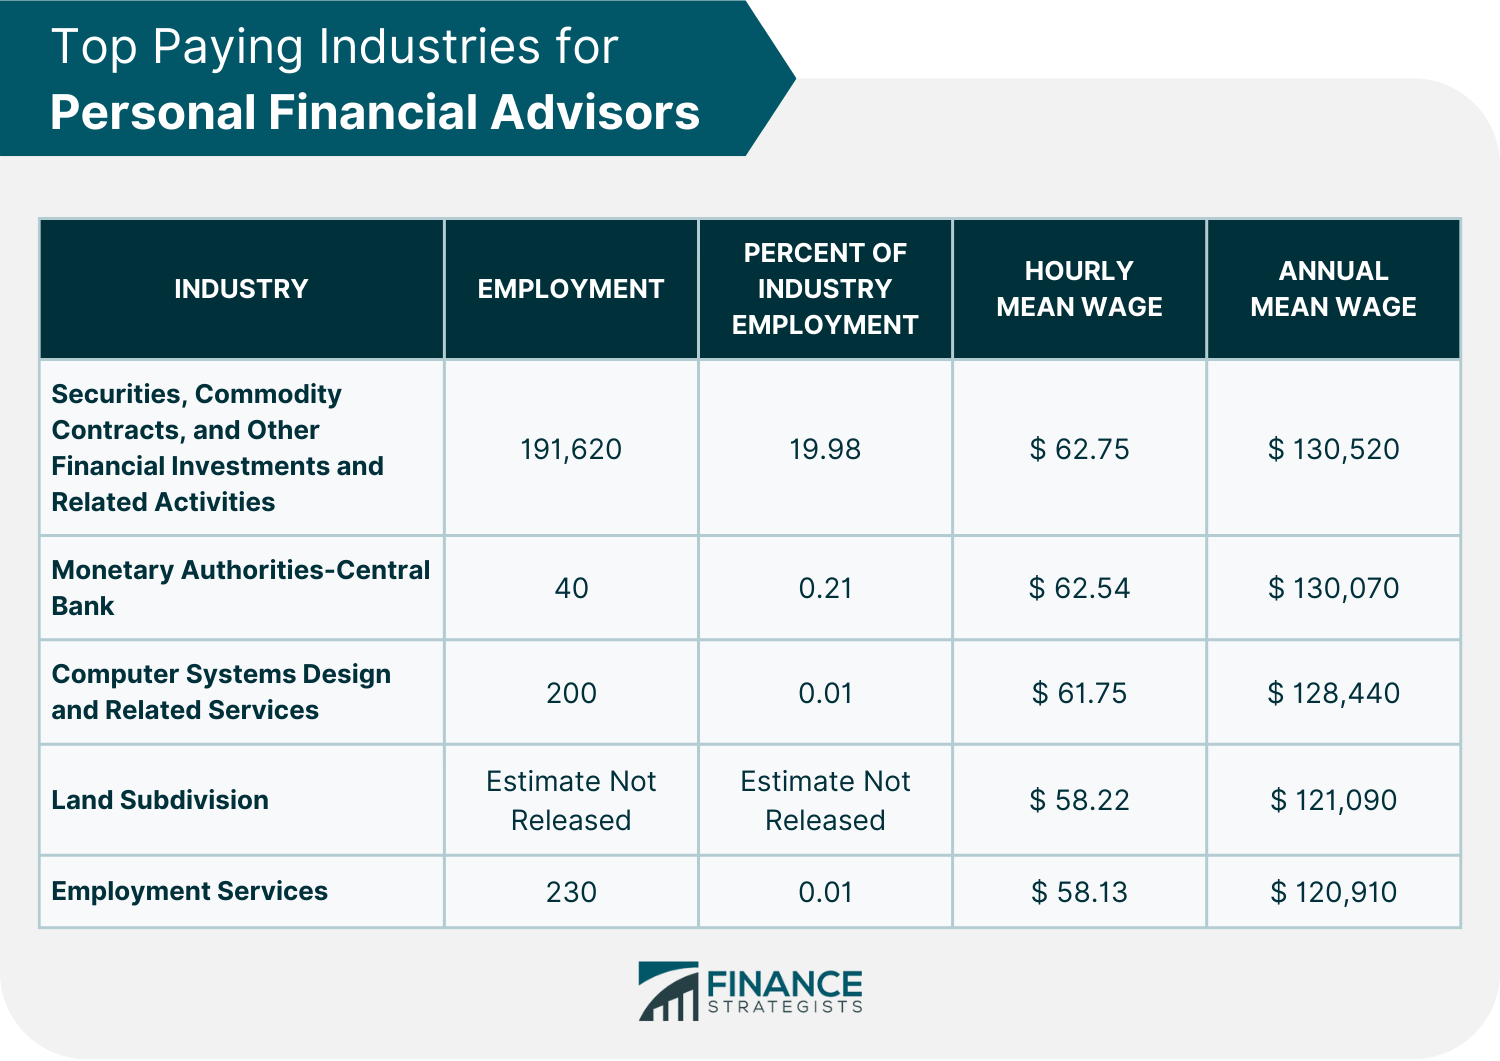 Top_Paying_Industries_for_Personal_Financial_Advisors (1)